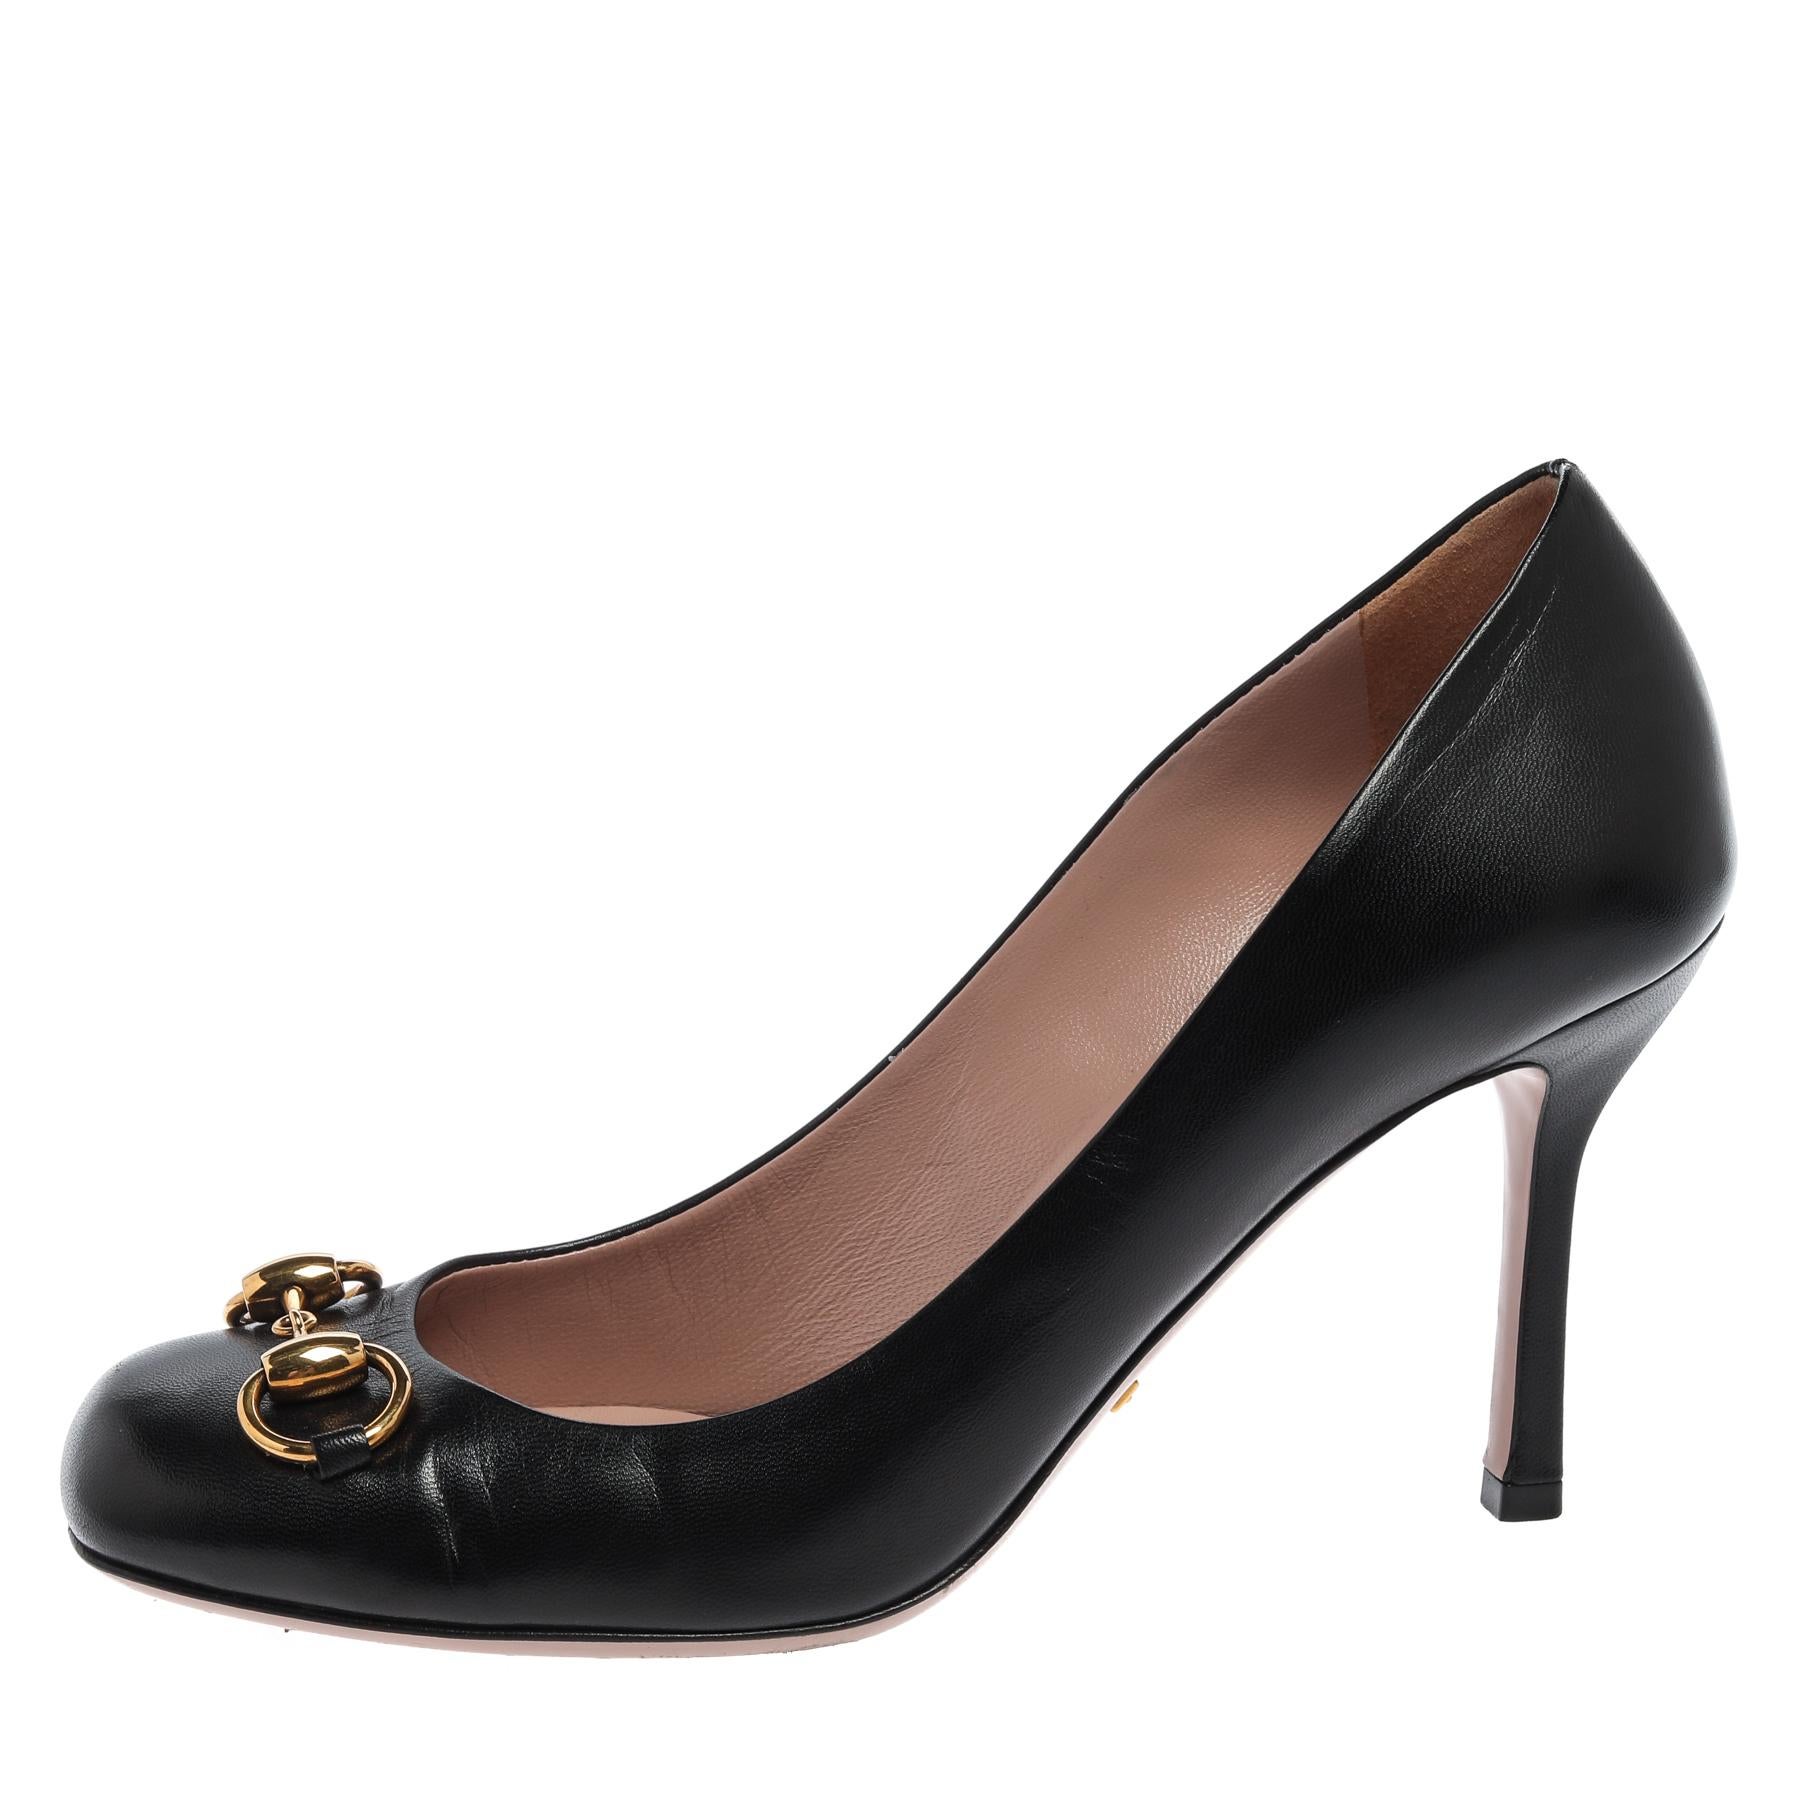 You will exude a classic style when you step out in this pair of Horsebit pumps from Gucci. Crafted from leather, the black pumps have been styled with square toes, 8.5 cm heels, and the iconic Horsebit detail on the uppers. The insoles have been